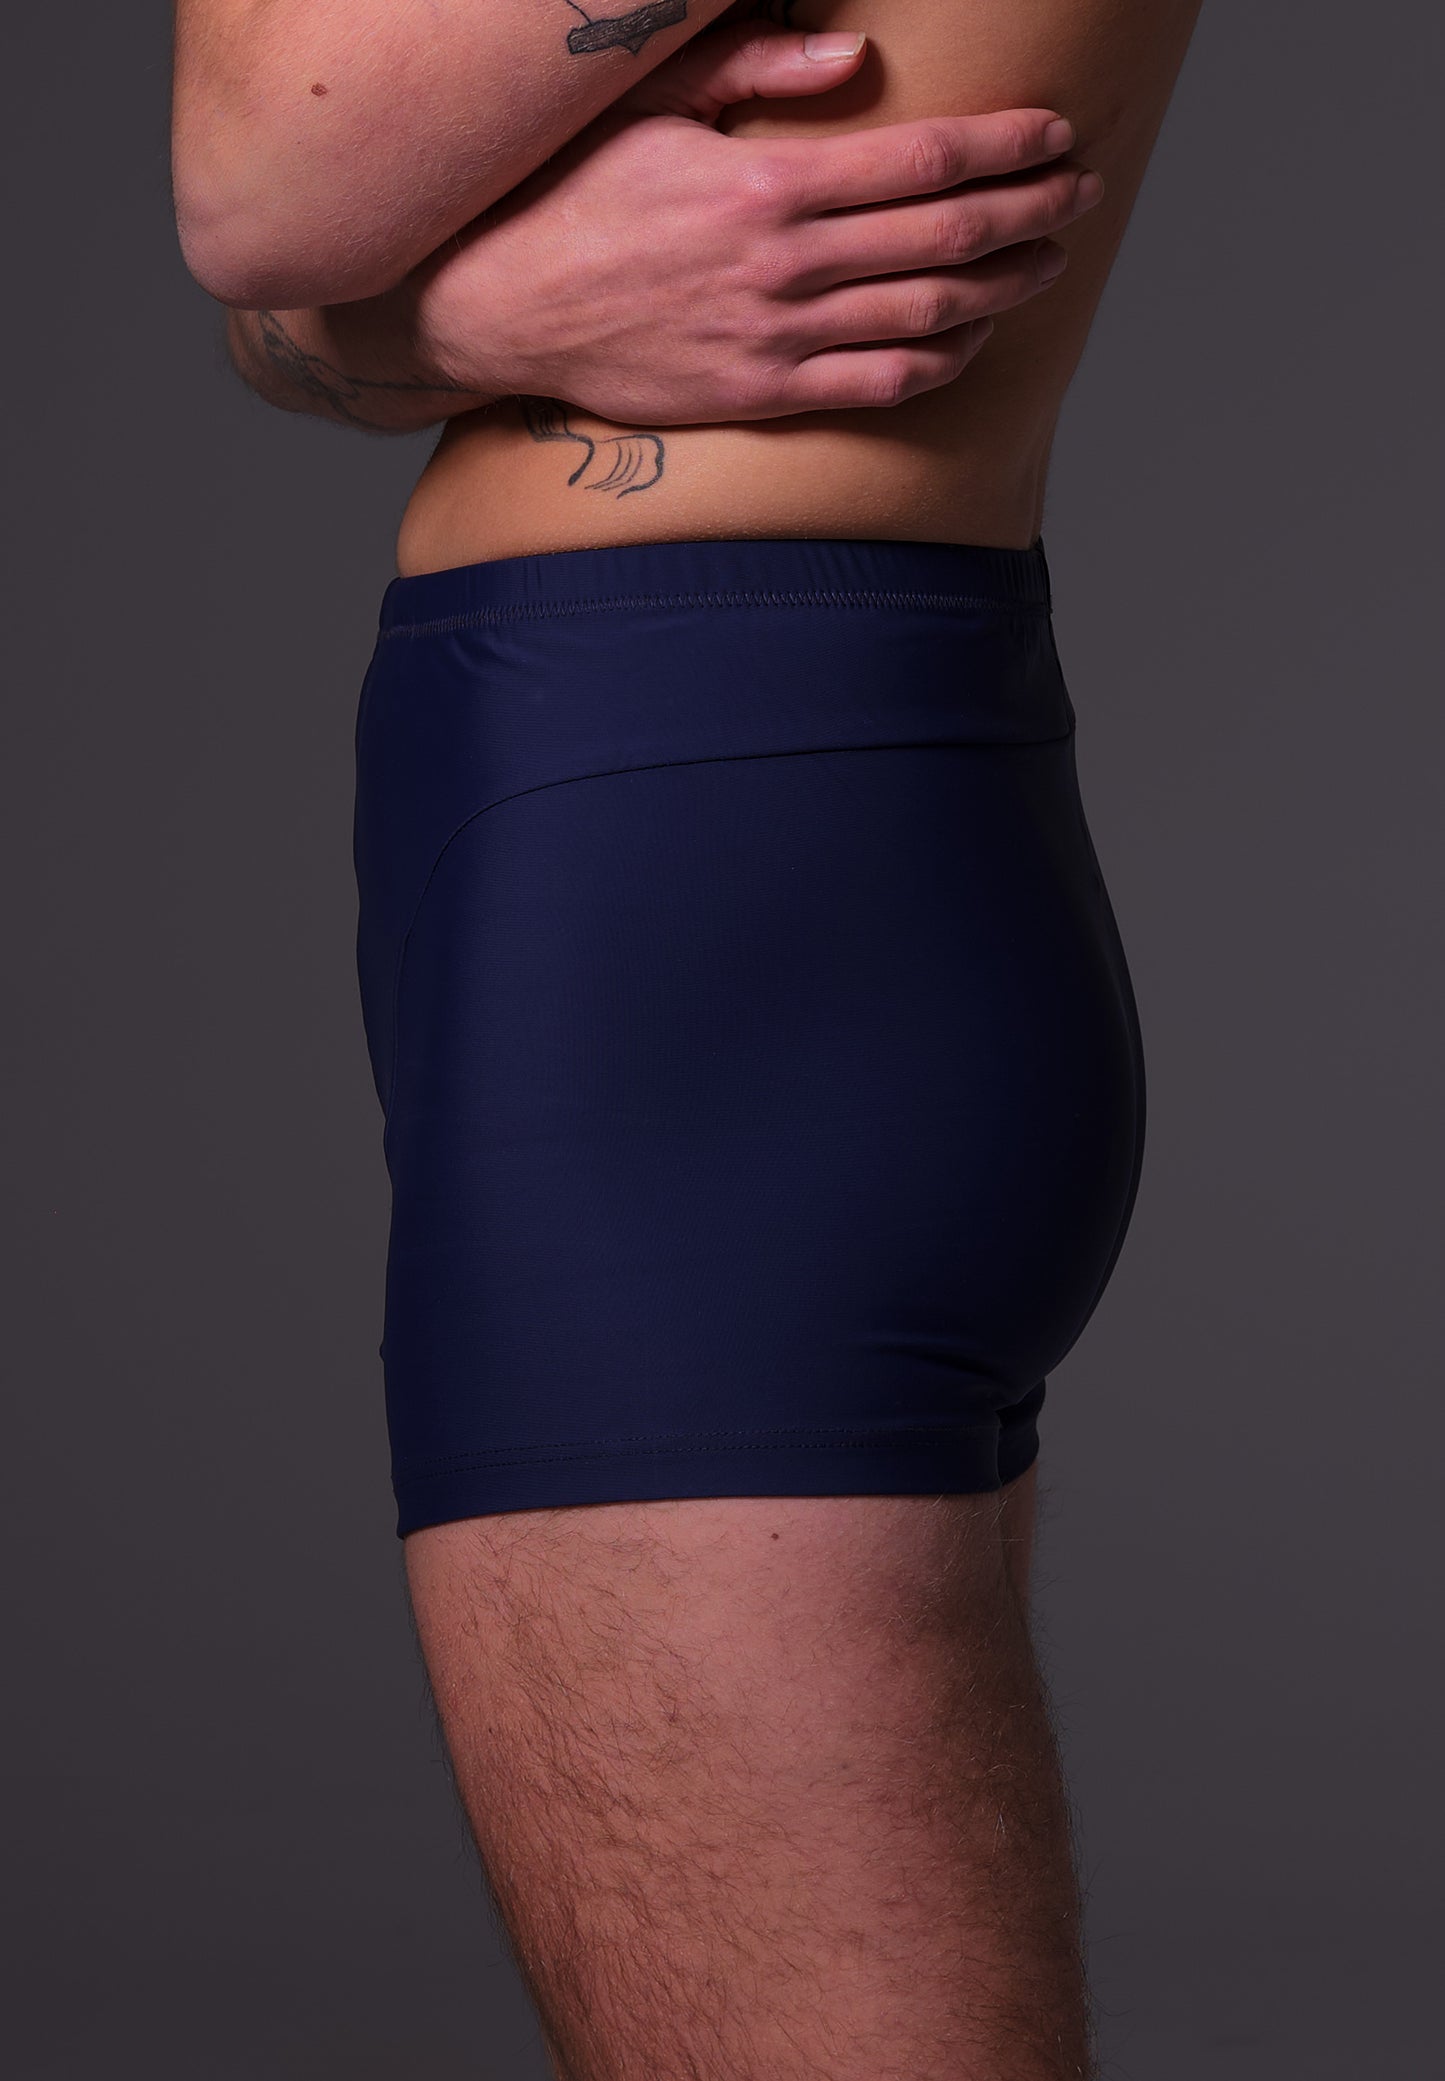 Side close-up of Mees wearing the Swim Shorts dark blue